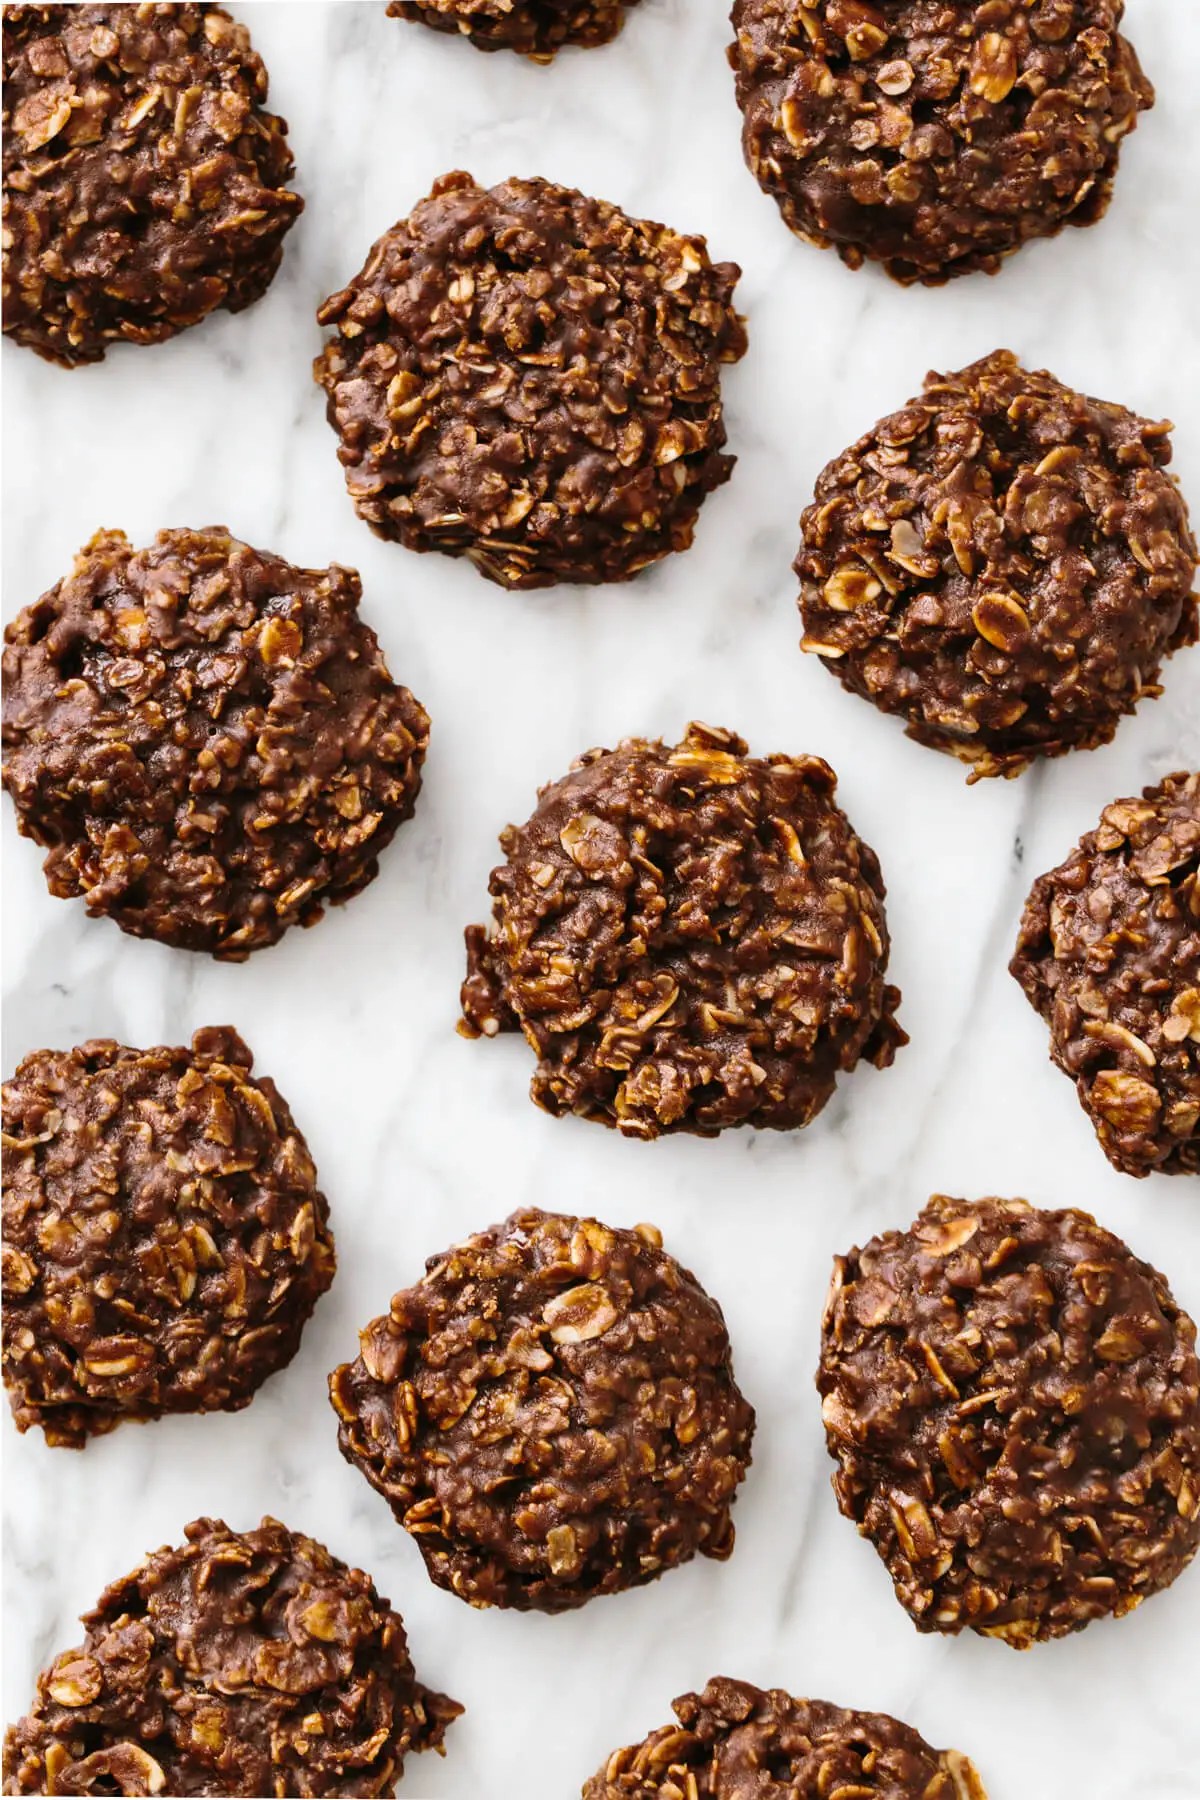 high-protein cookie recipes no bake cocoa cookies